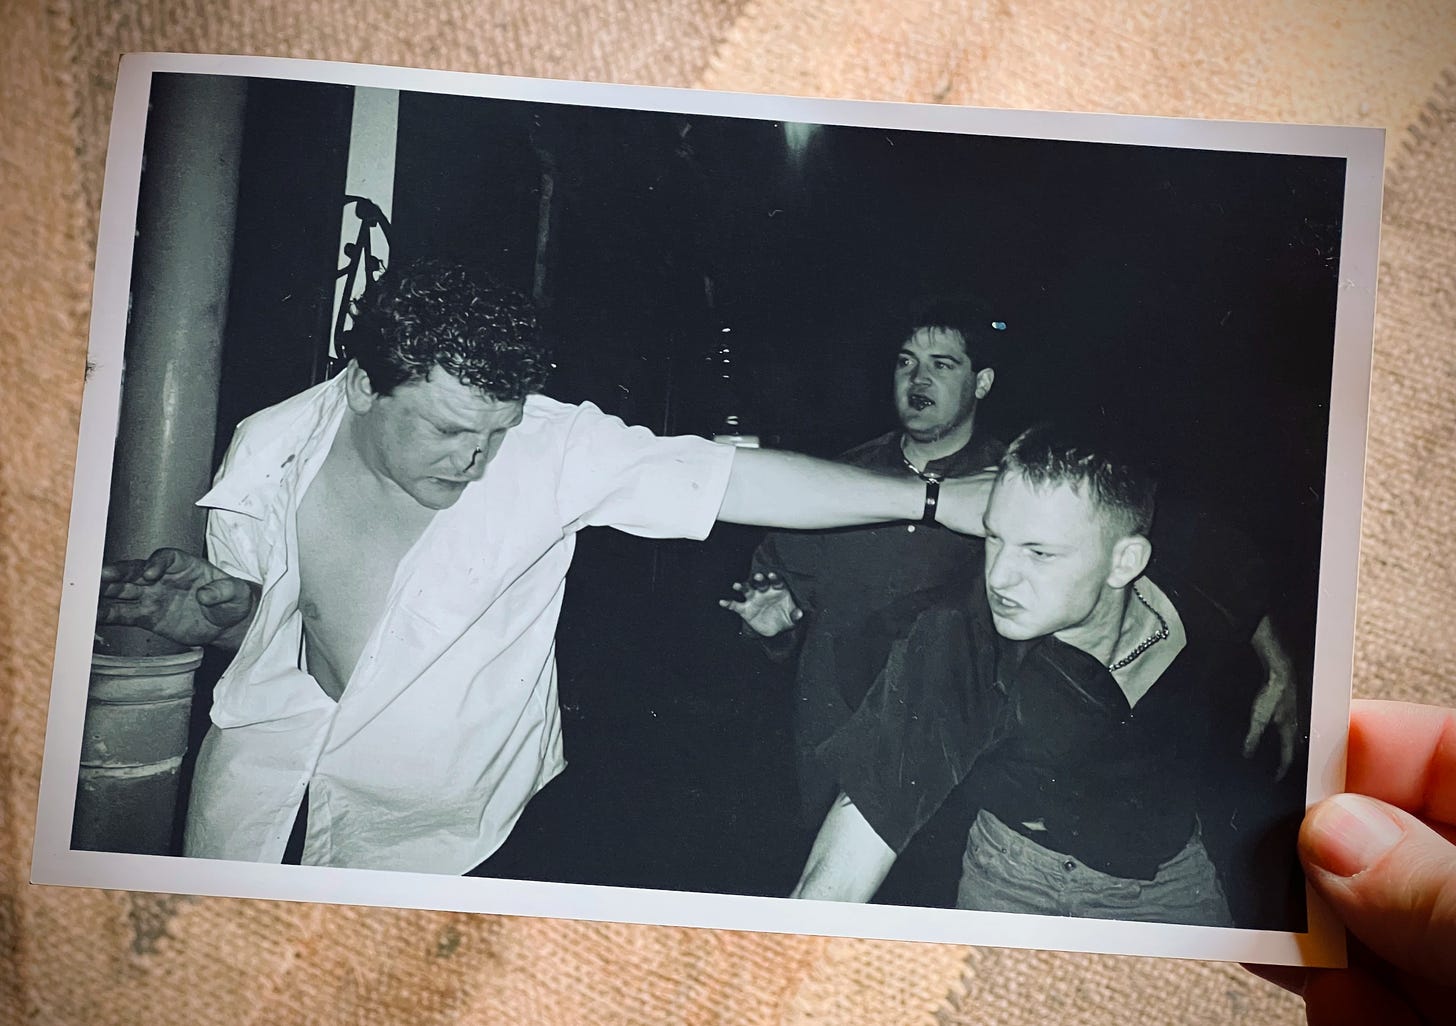 A hand holds up a photograph showing two young men mid brawl. One has just swung a punch and the other guy, bleeding from the nose looks dazed and in defence. In the background a guy with a swollen bleeding lip looks like he is half heartedly trying to stop the fight.